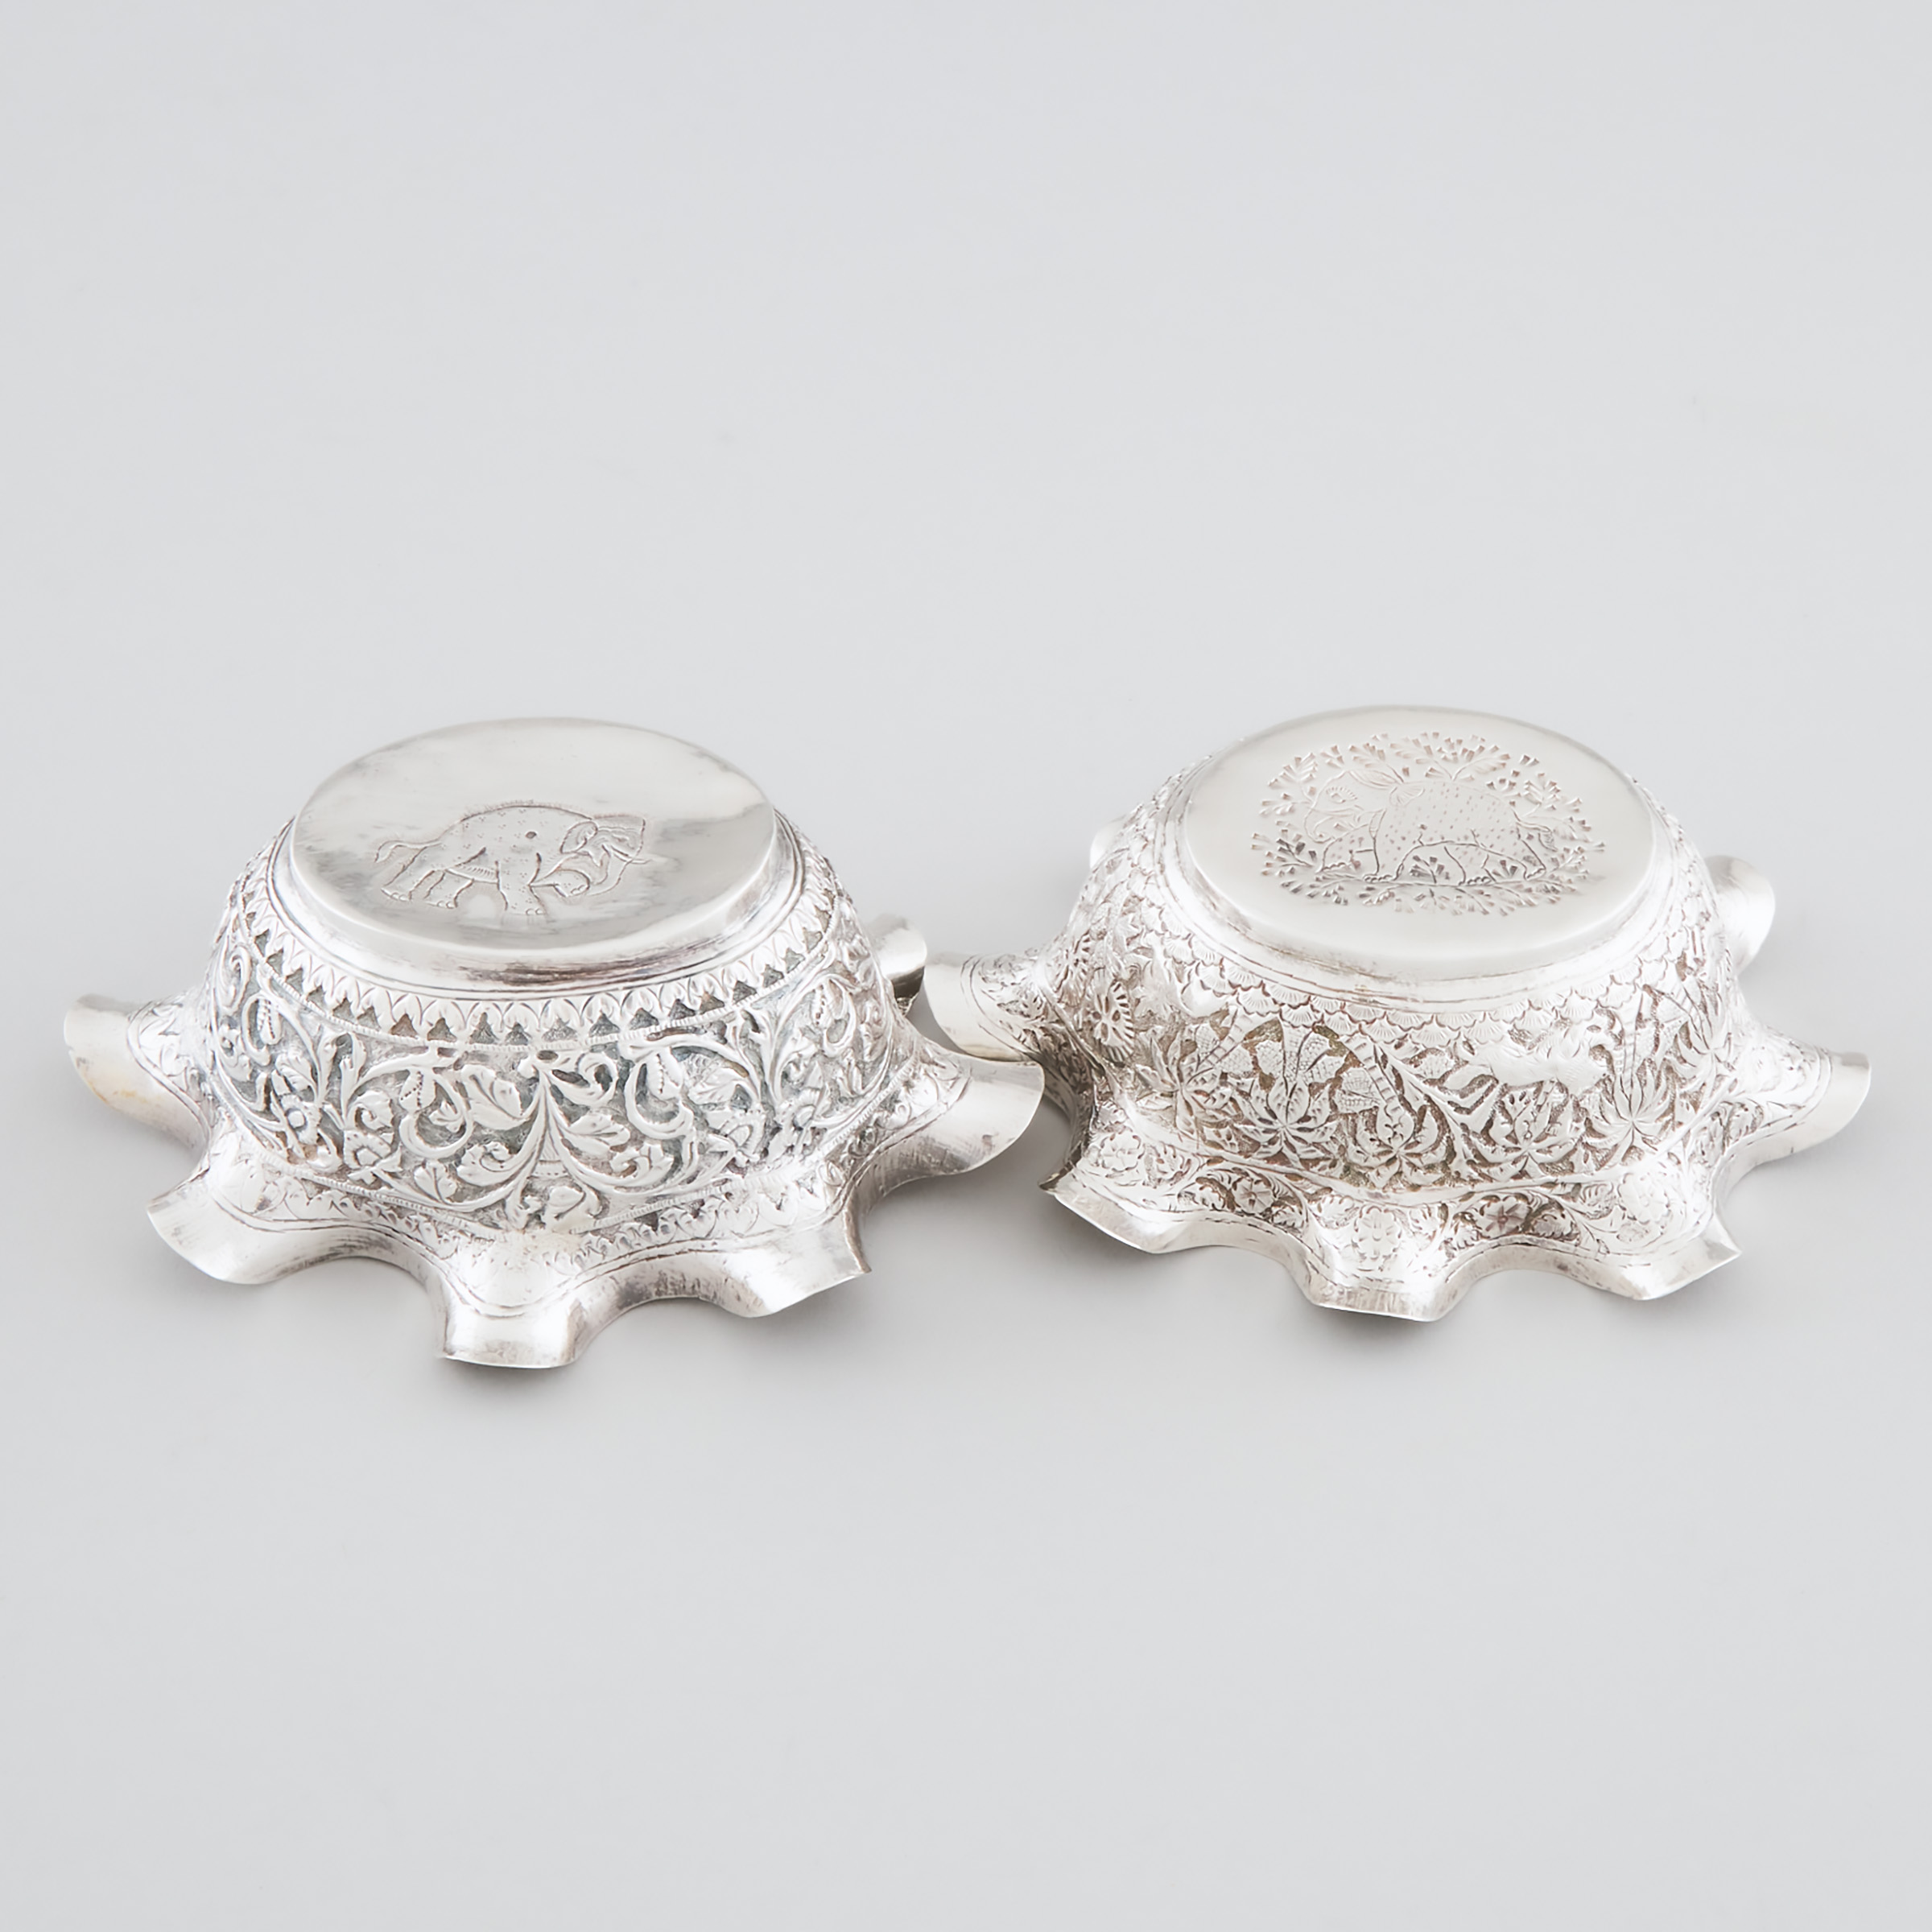 Two Burmese Silver Small Oval Bowls, early 20th century